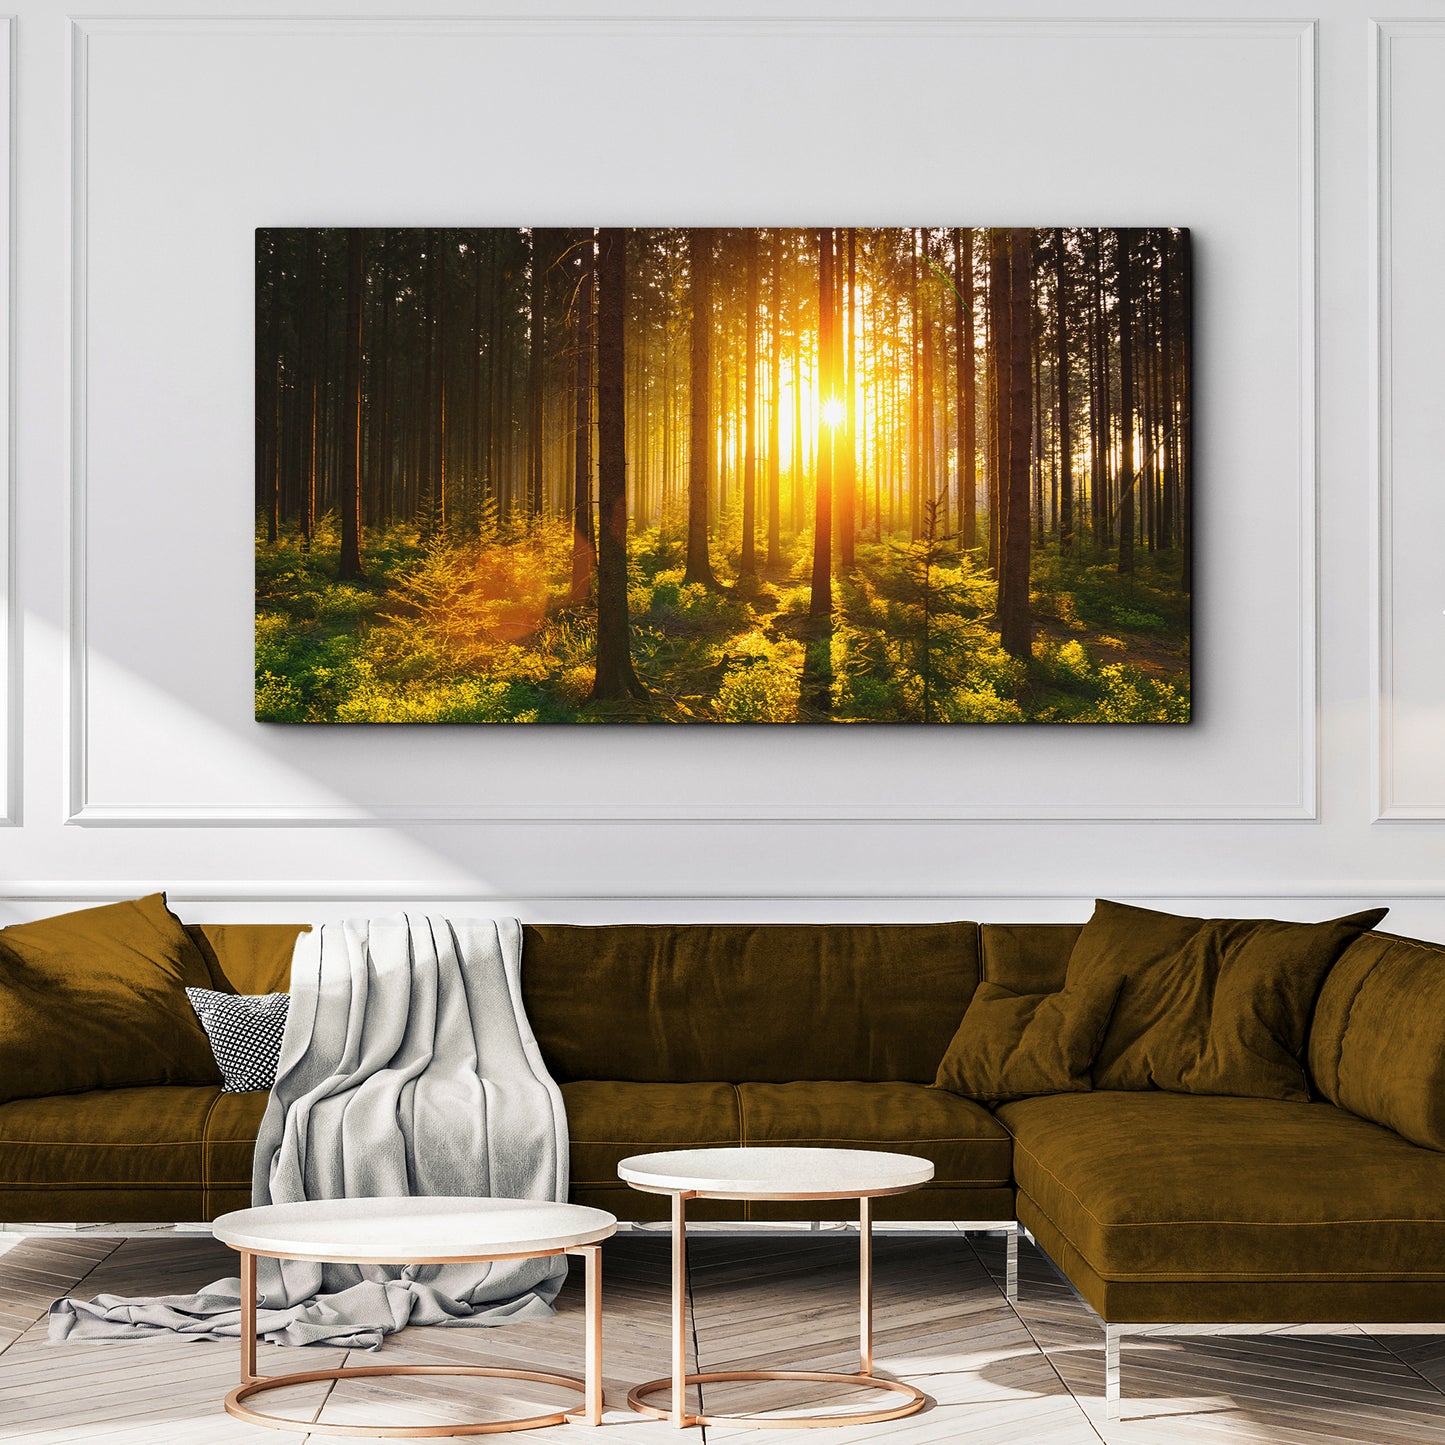 Silent Woods At Sunrise Canvas Wall Art Style 2 - Image by Tailored Canvases